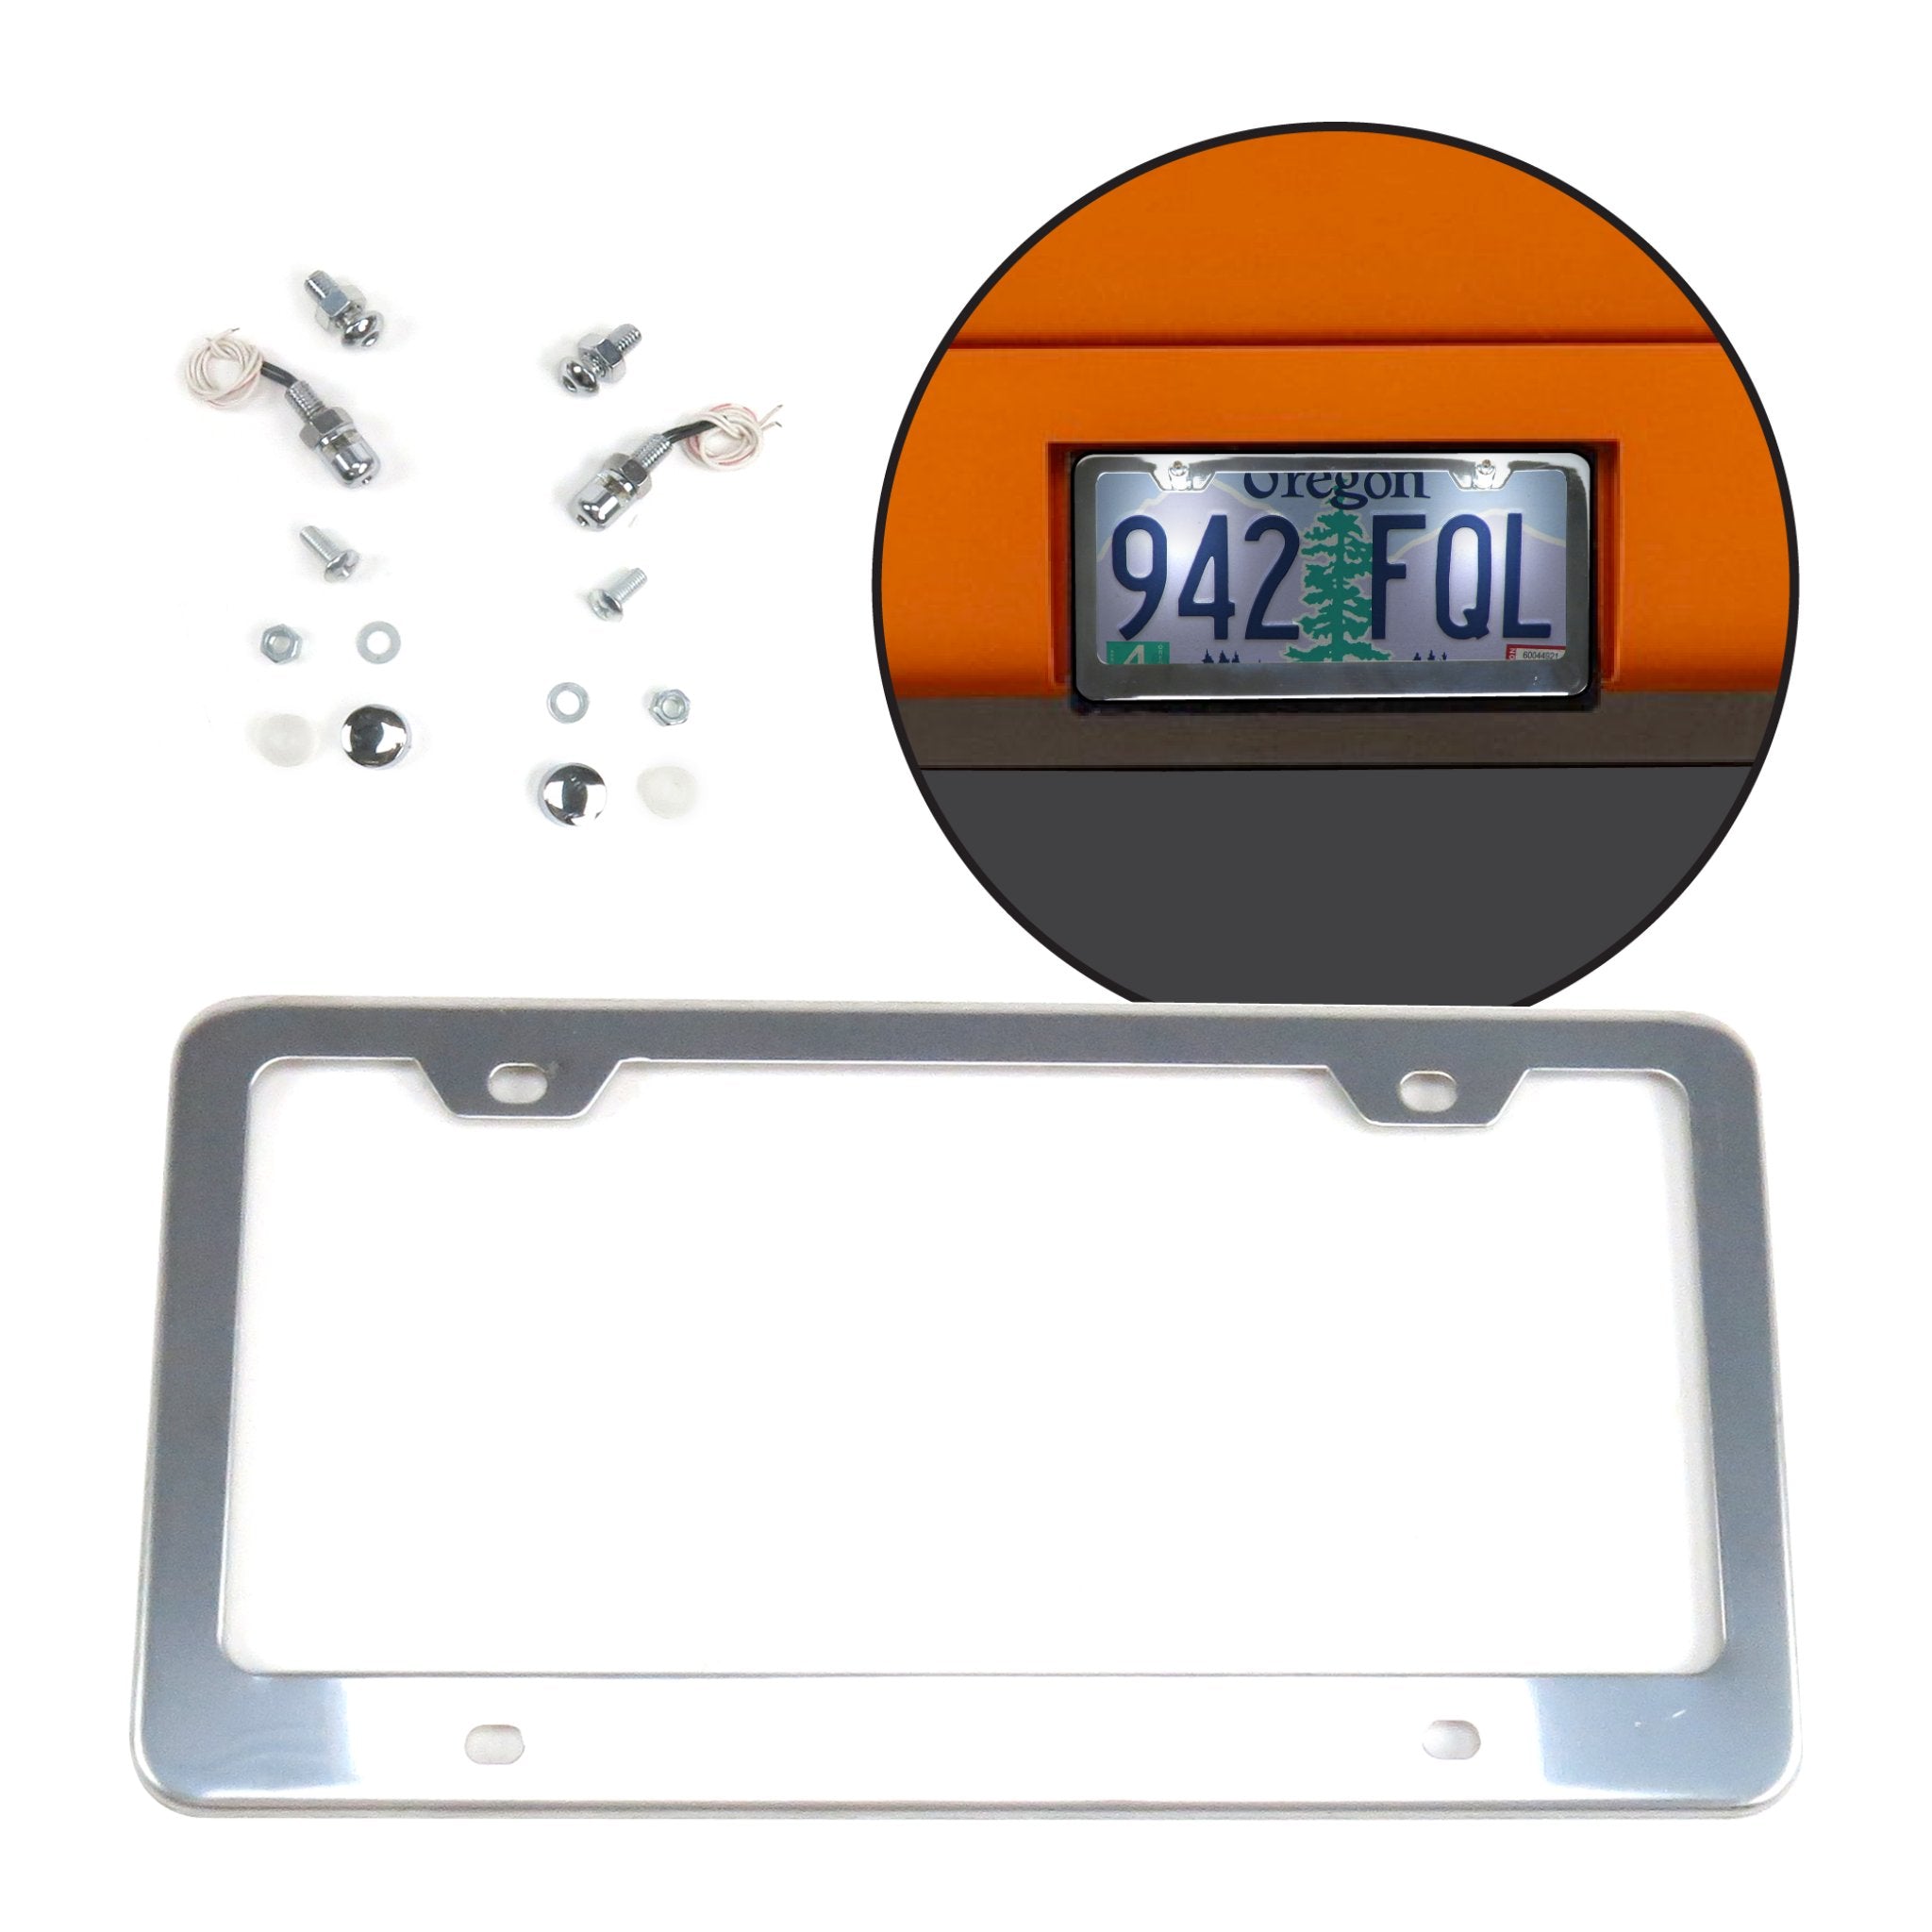 Stainless Steel Chrome Metal Car License Plate Frame 6"x12" w/ LED Light Bolts